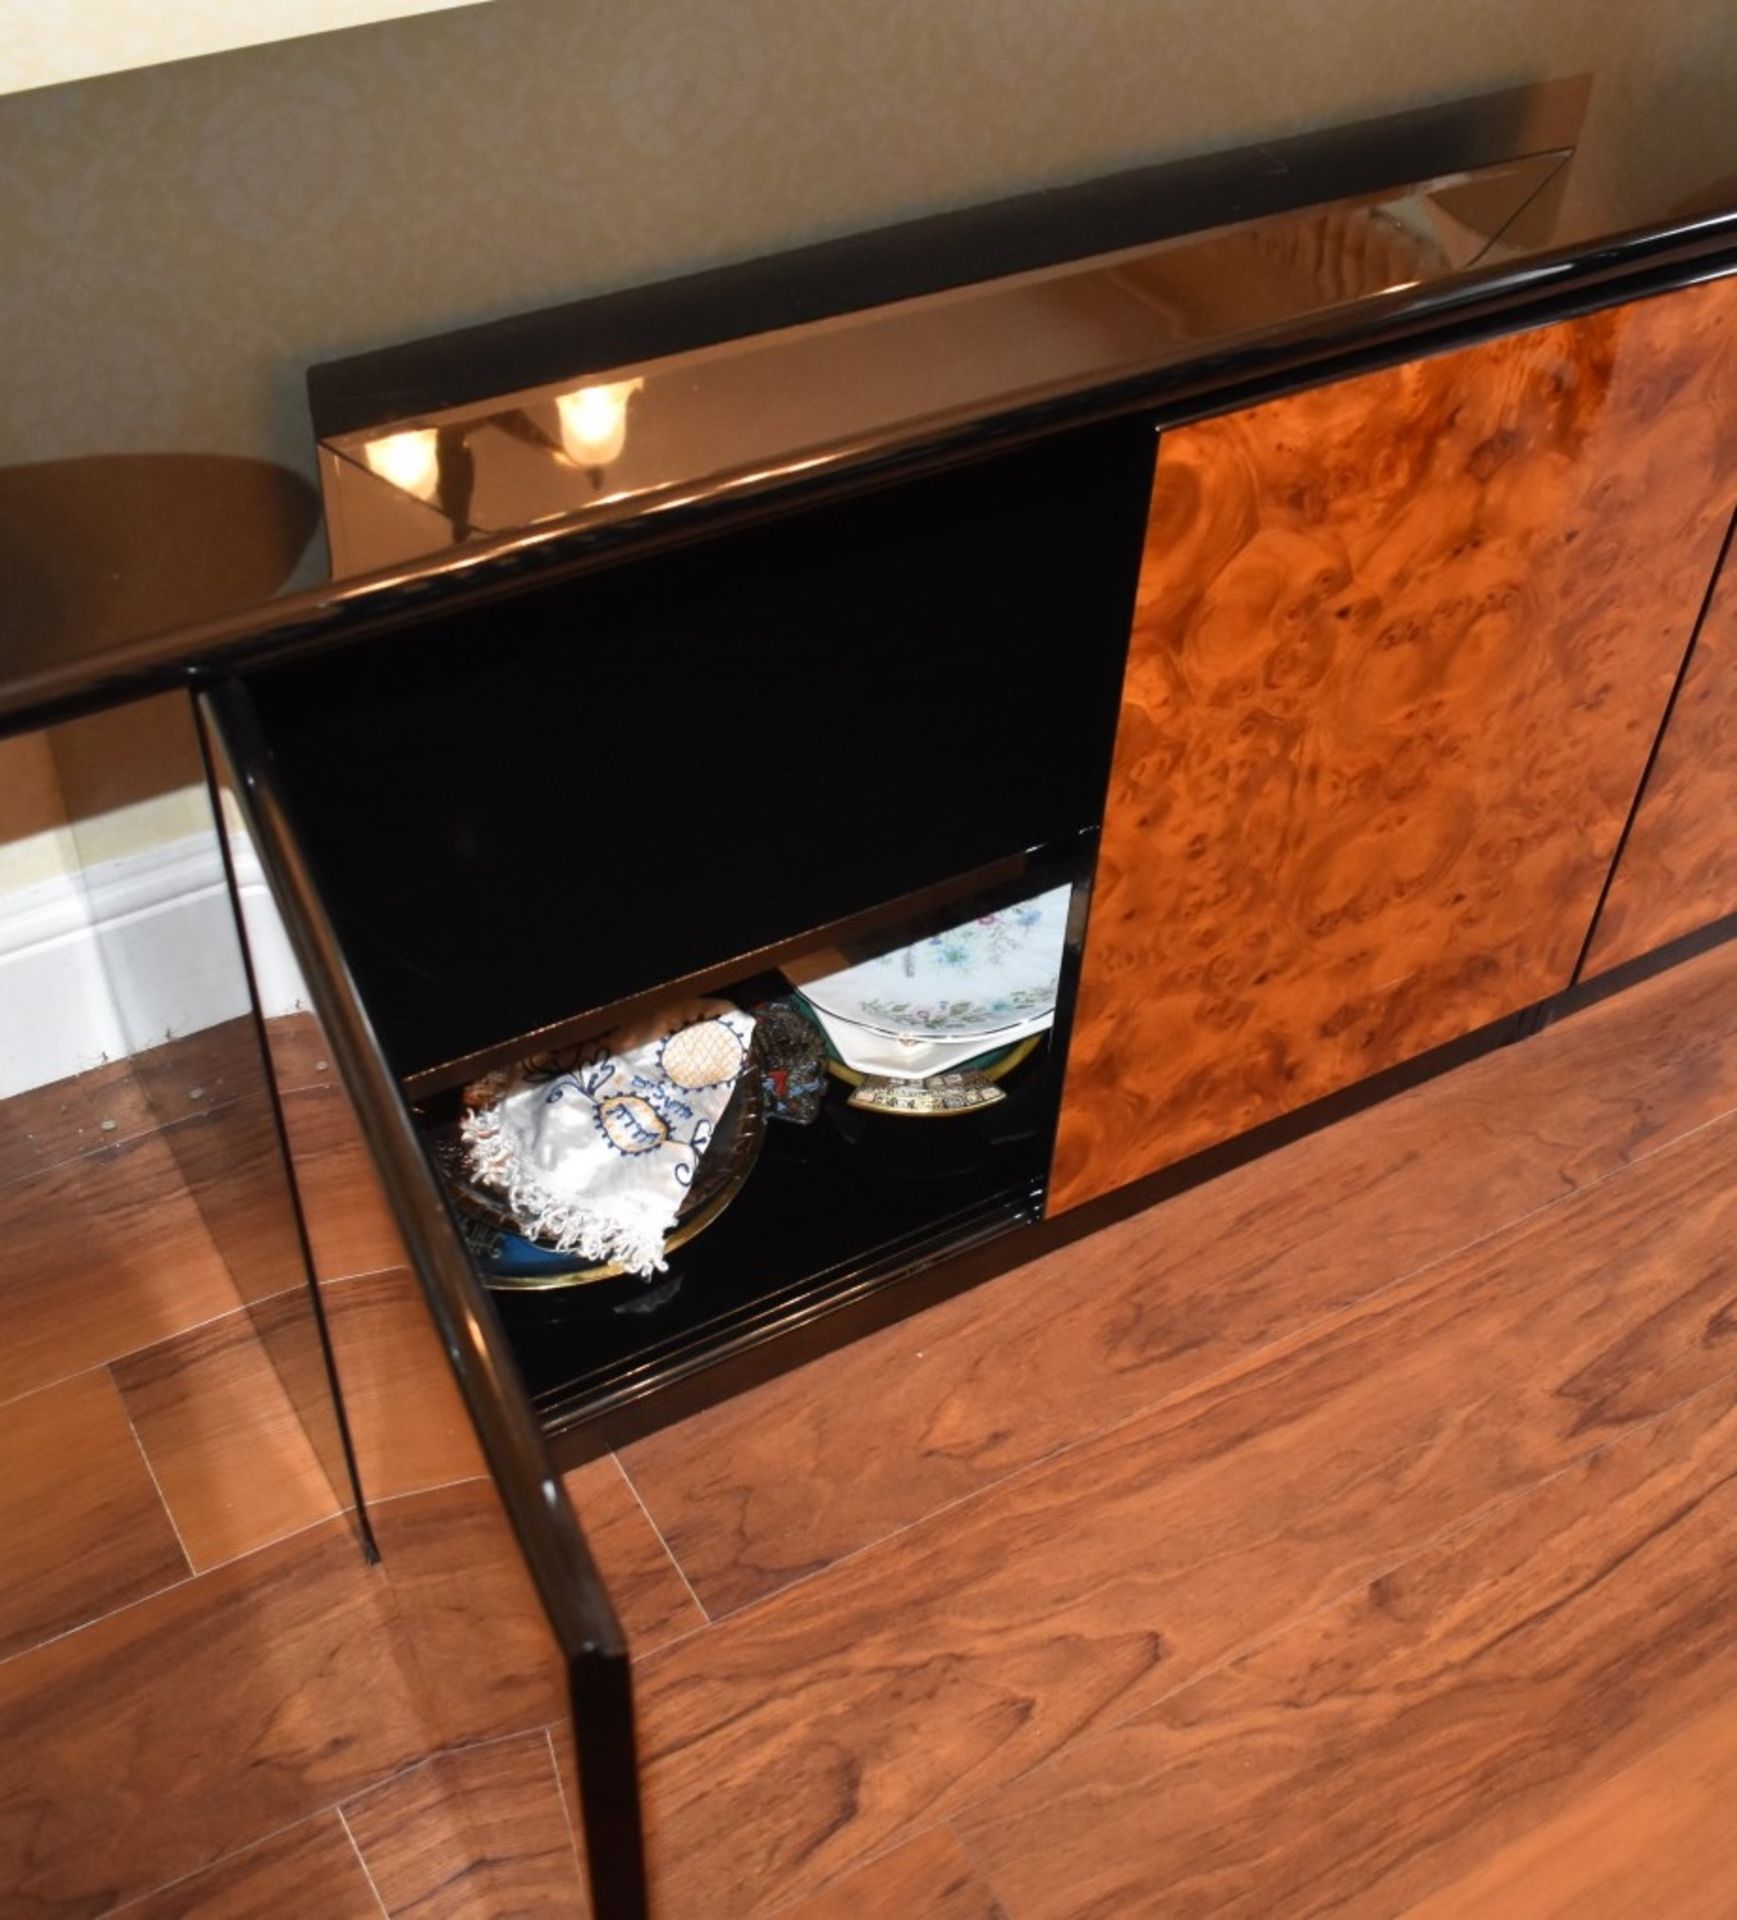 1 x Contemporary Three Door Sideboard With Dark Gloss Finish and Burr Walnut Doors - Dimensions - Image 5 of 10